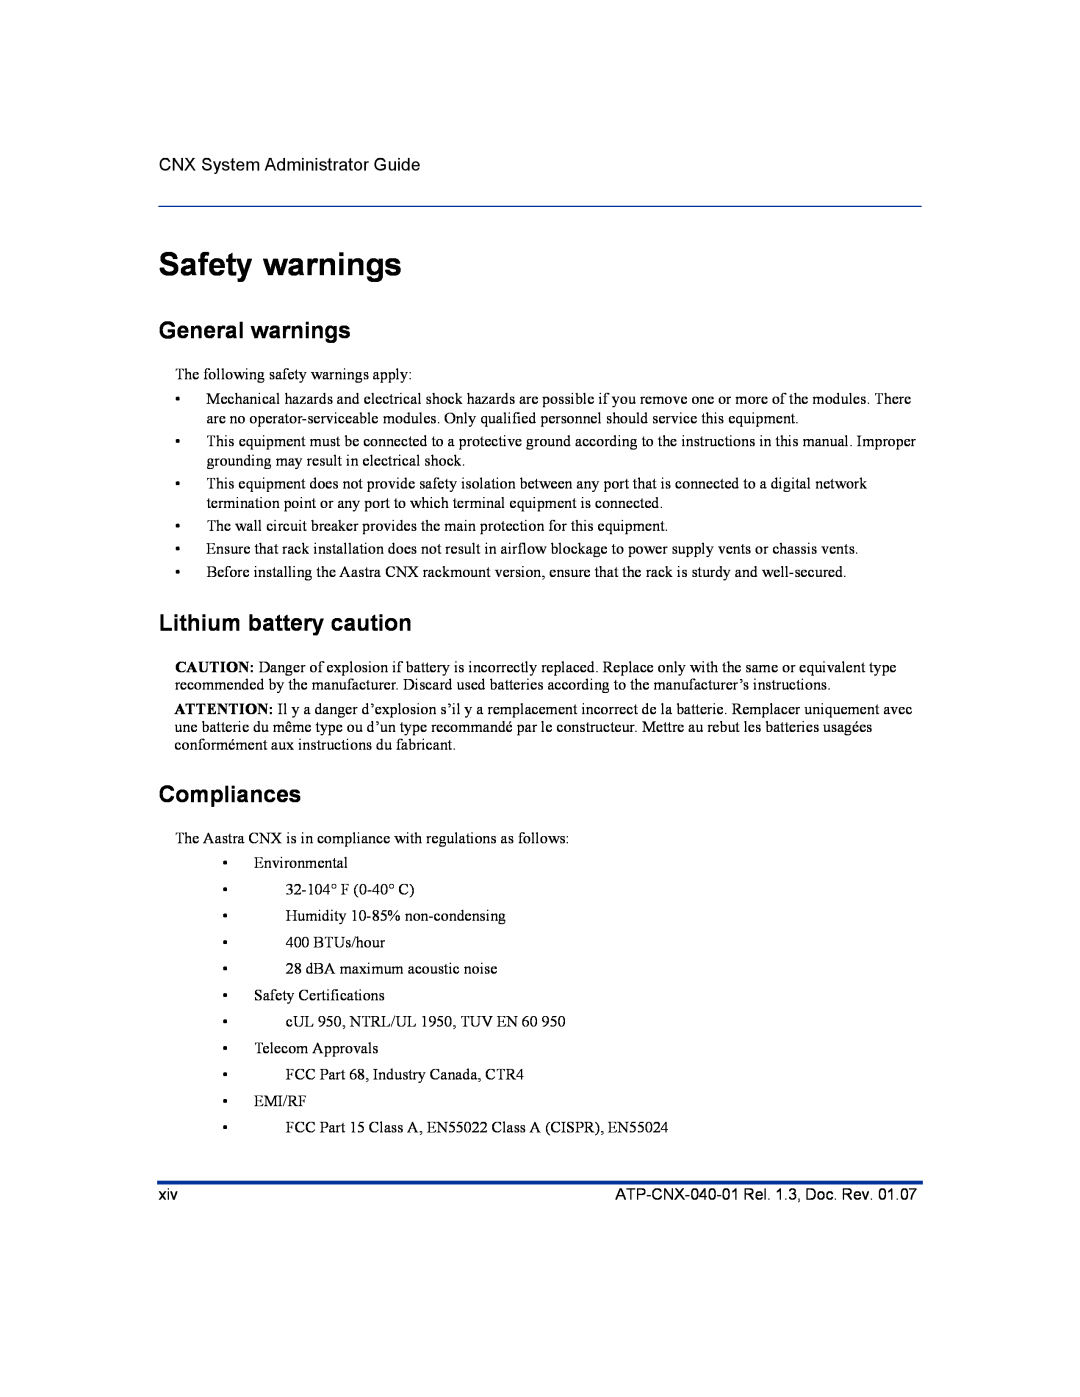 Aastra Telecom ATP-CNX-040-01 manual Safety warnings, General warnings, Lithium battery caution, Compliances 